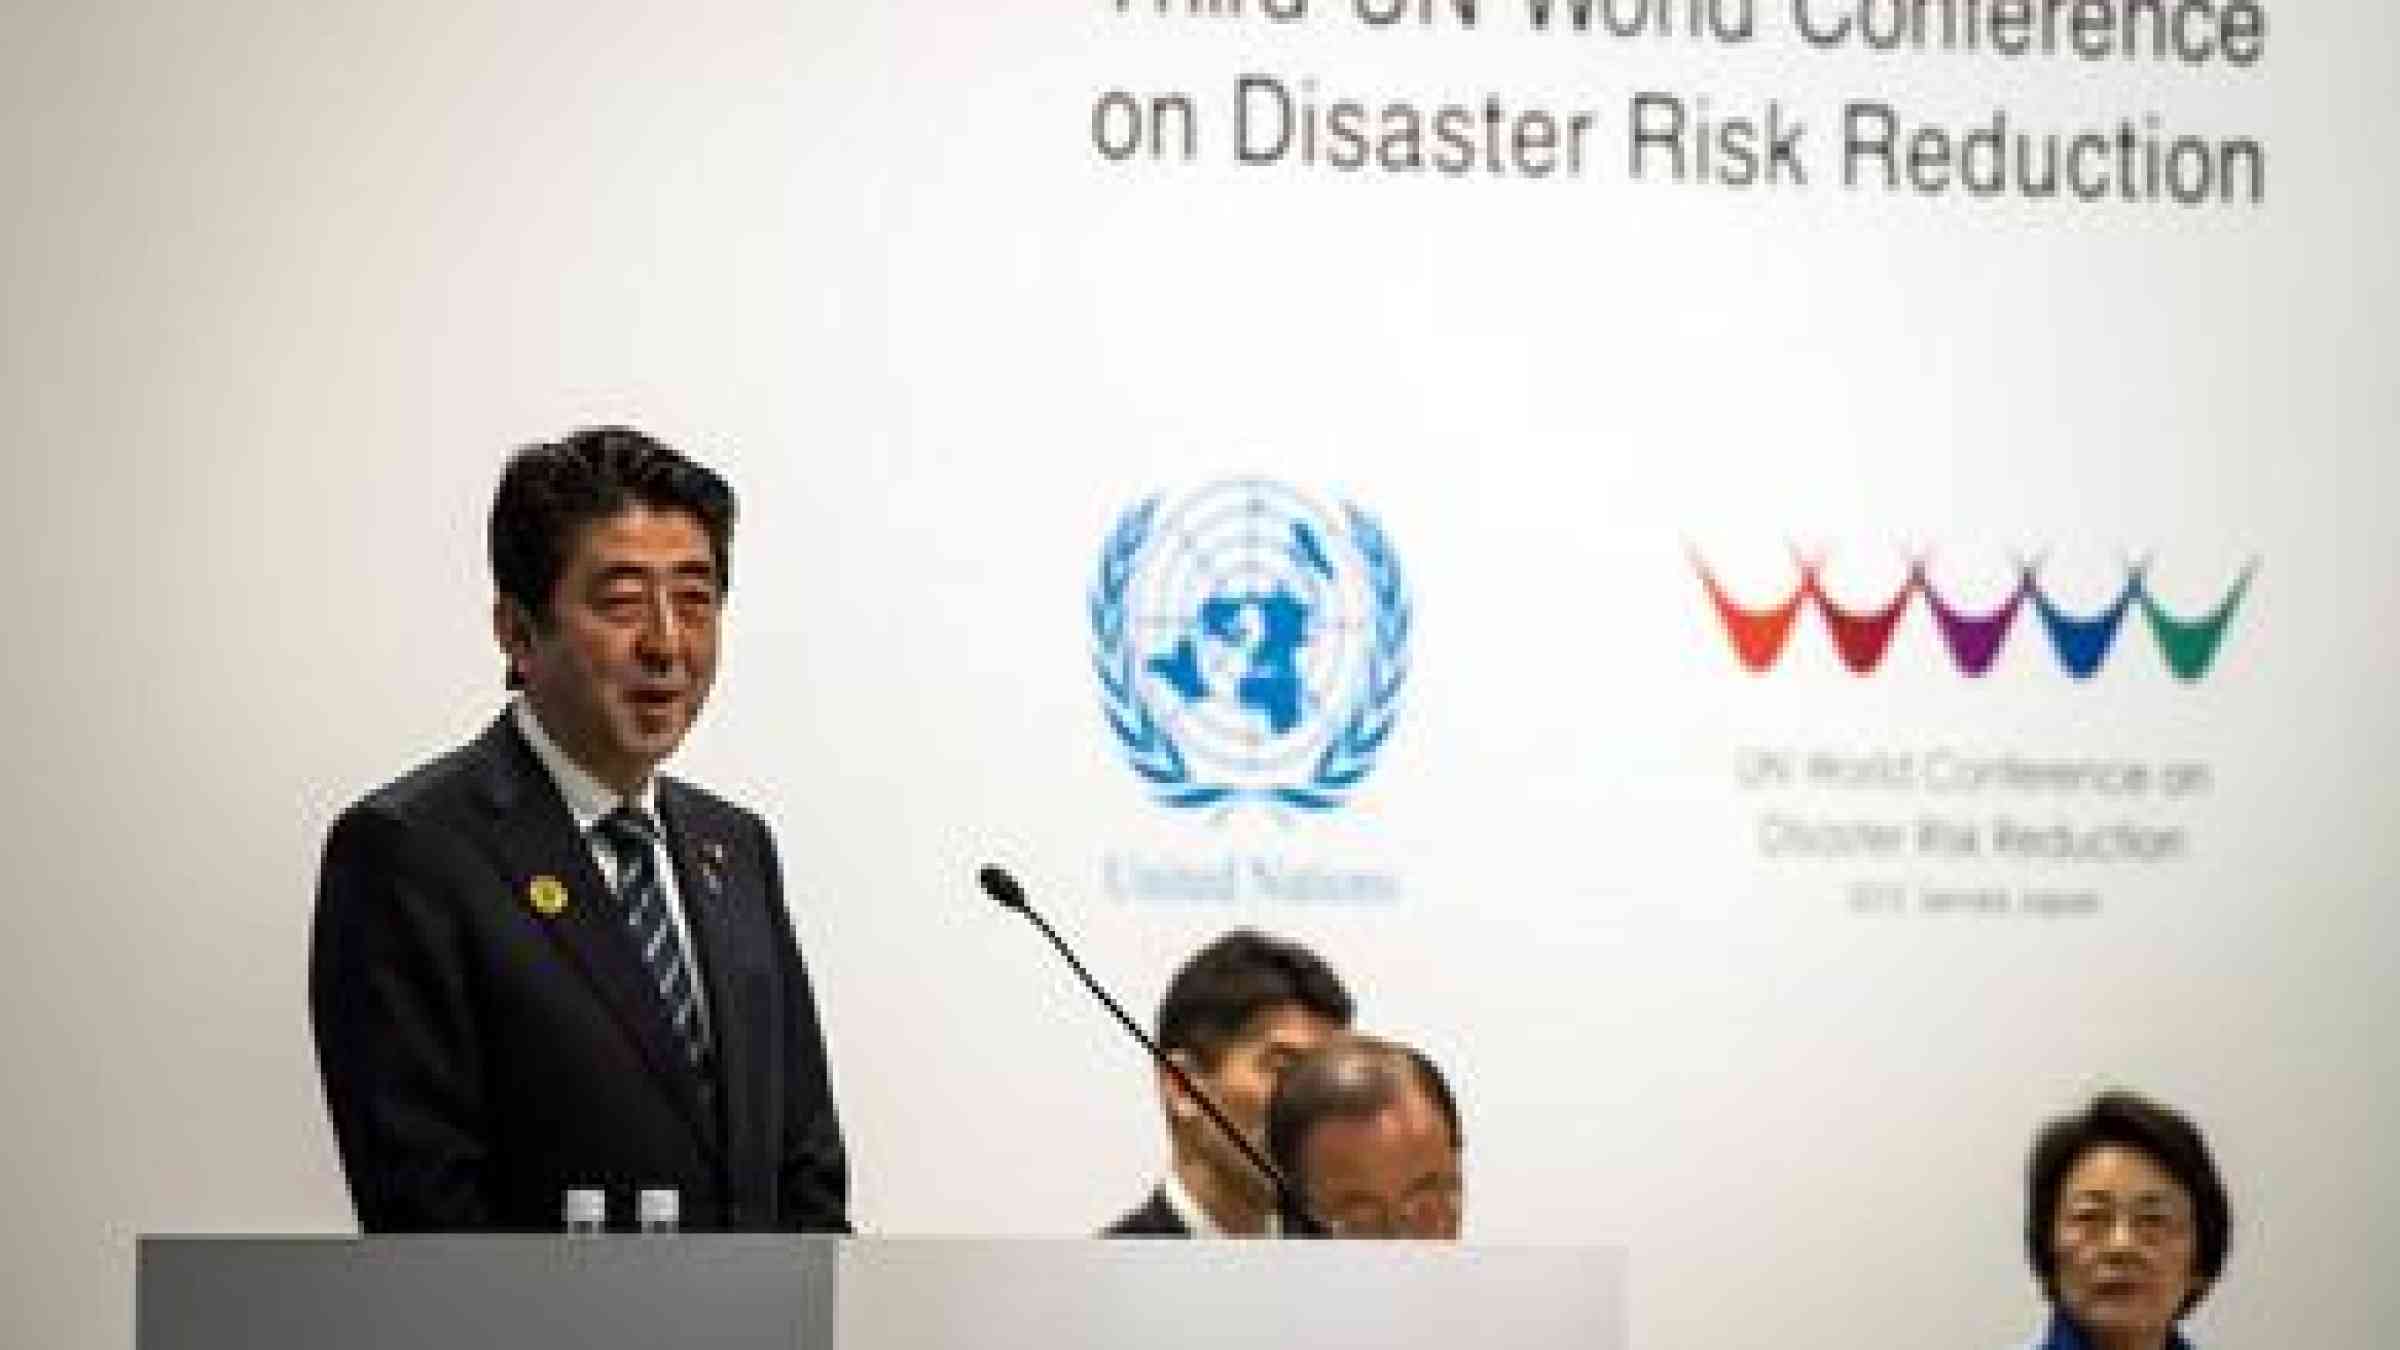 Photo by UNISDR Japanese Prime Minister Shinzo Abe speaks at the WCDRR.